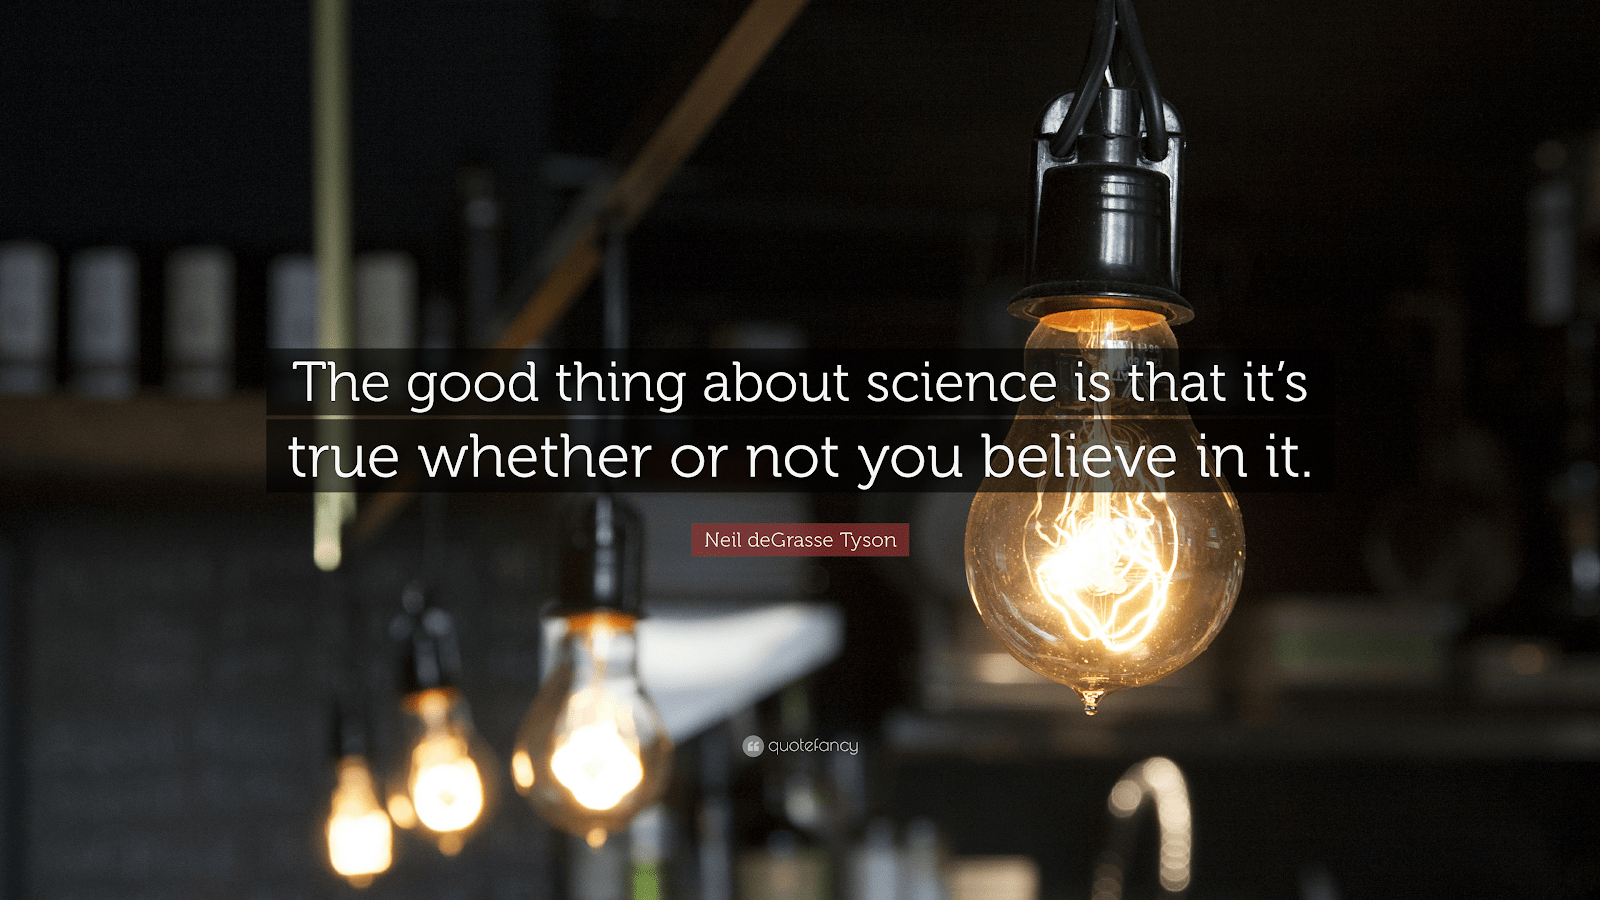 The good thing about science is that it's true whether or not you believe in it.